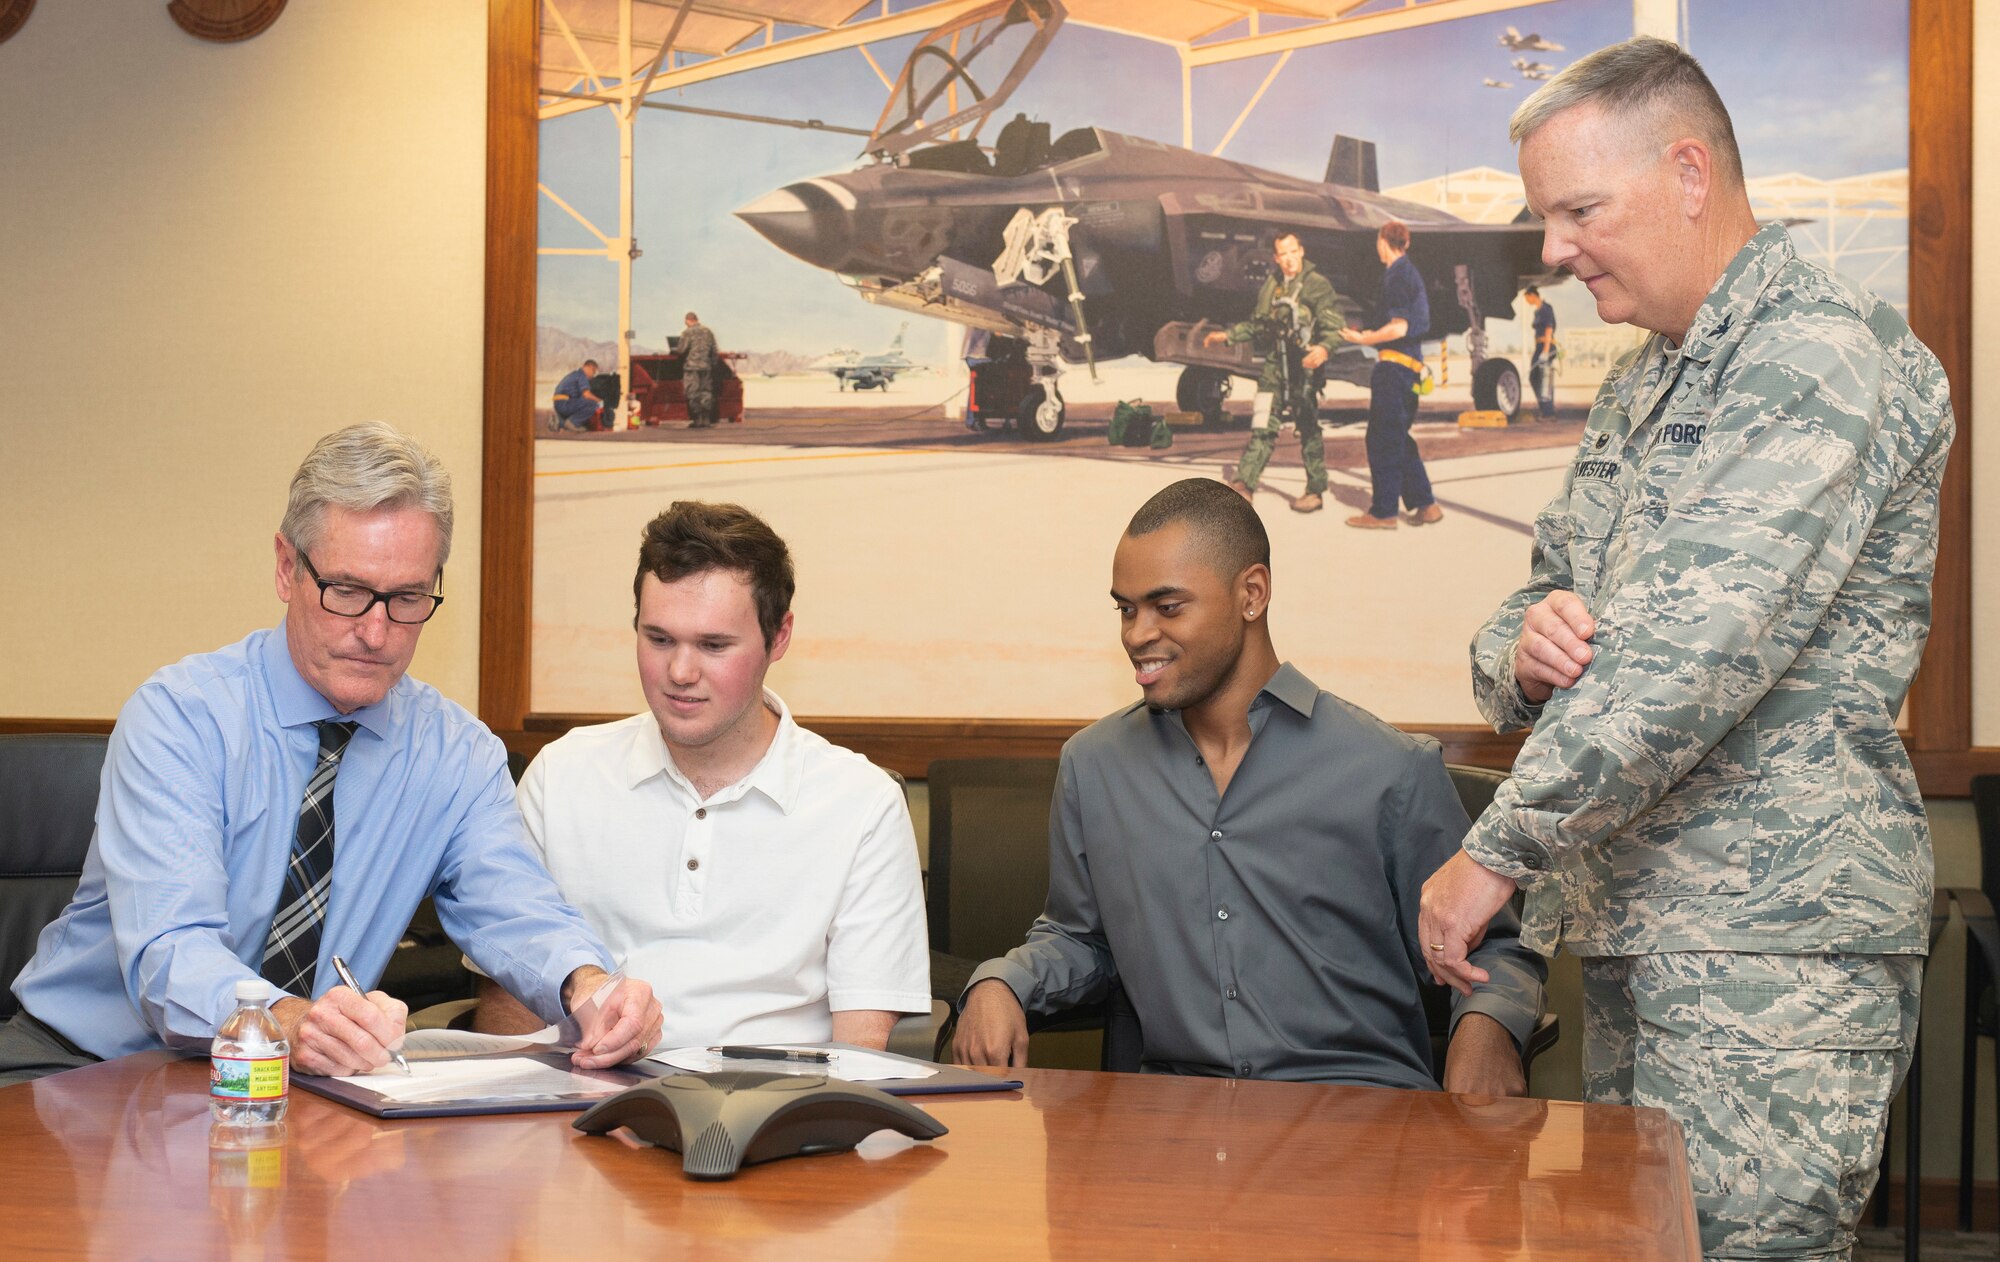 John Mulcahy, Assistant Superintendent of Professional Development and Adult Education at the West Maricopa Education Center, signs an educational opportunities memorandum with Luke Air Force Base Aug. 14, 2018, at Luke Air Force Base, Ariz.